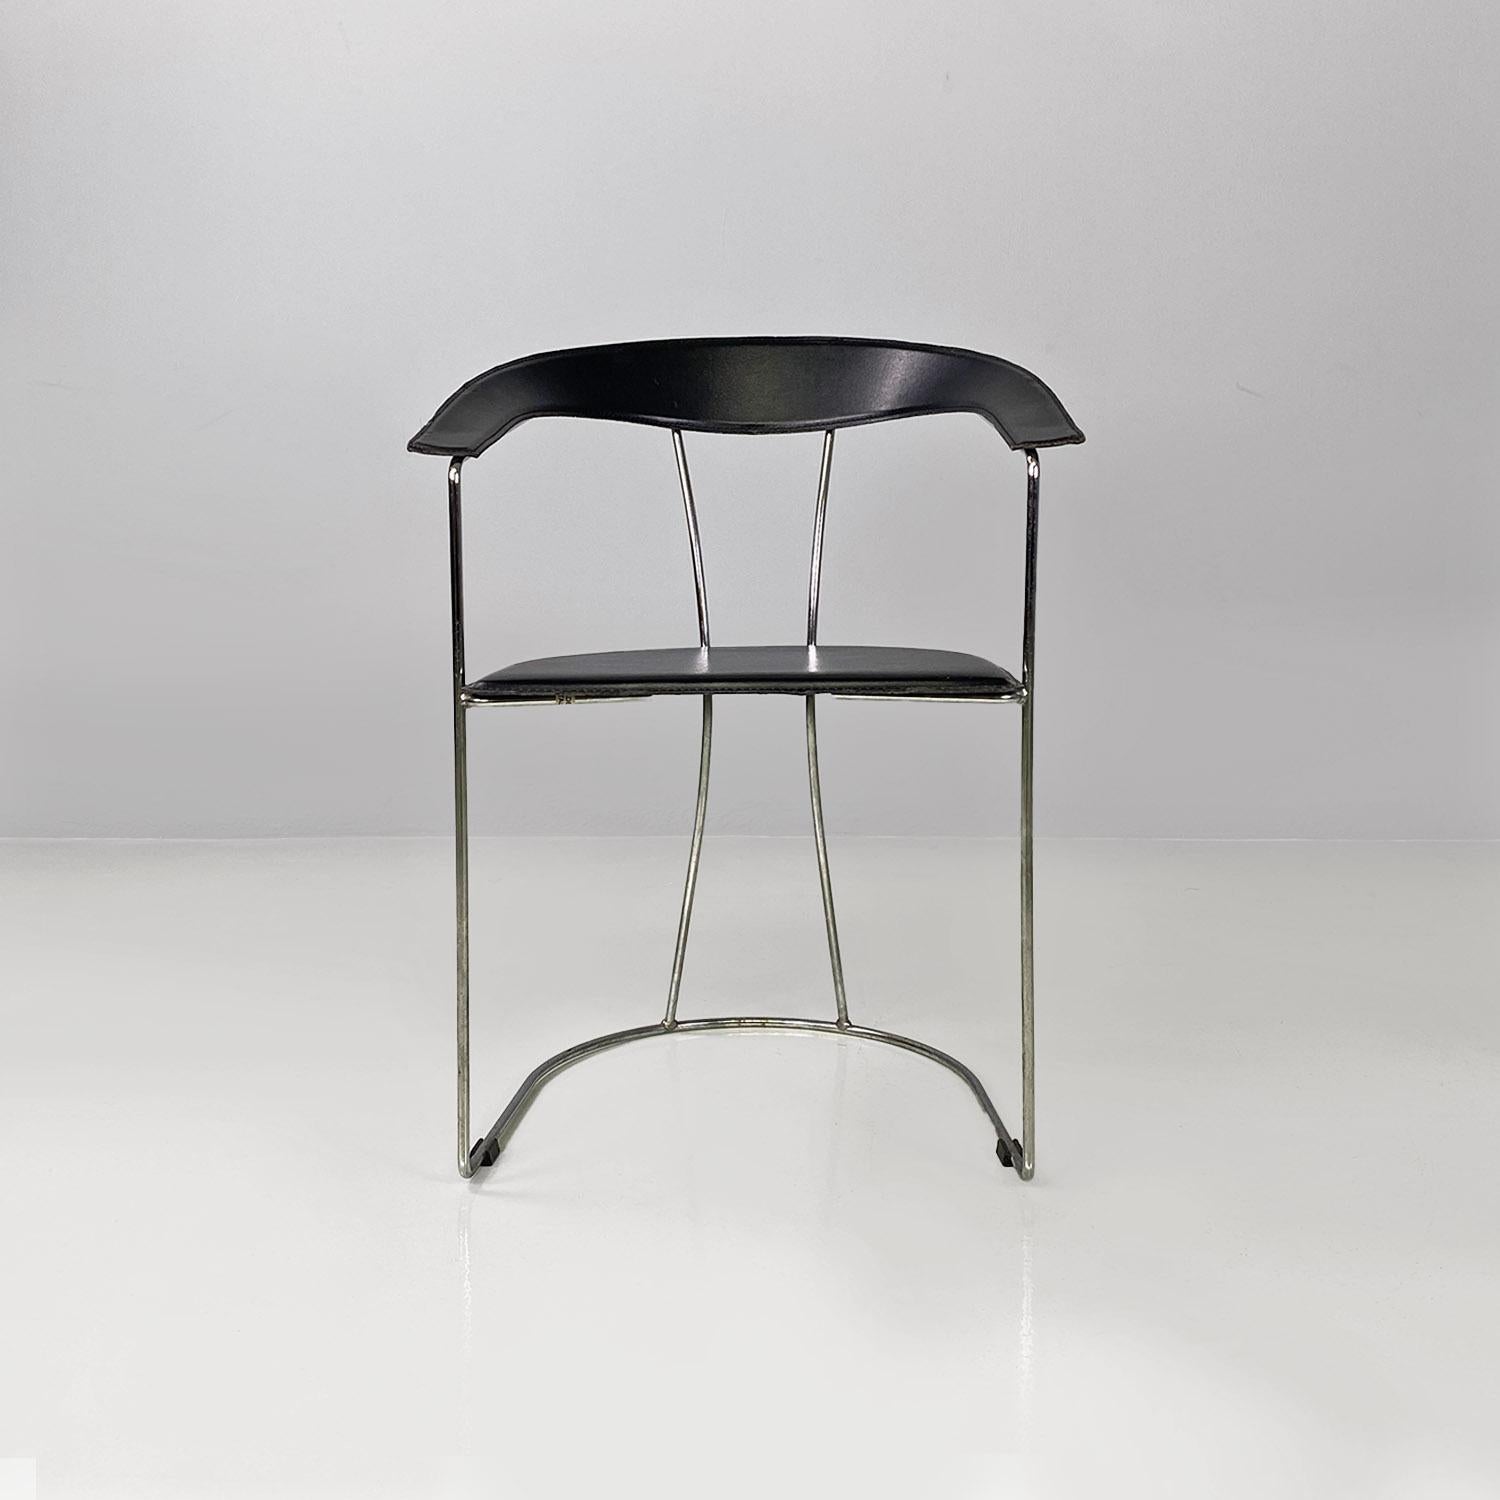 Modern Italian modern chromed metal and black leather curved shape chairs, 1980s For Sale